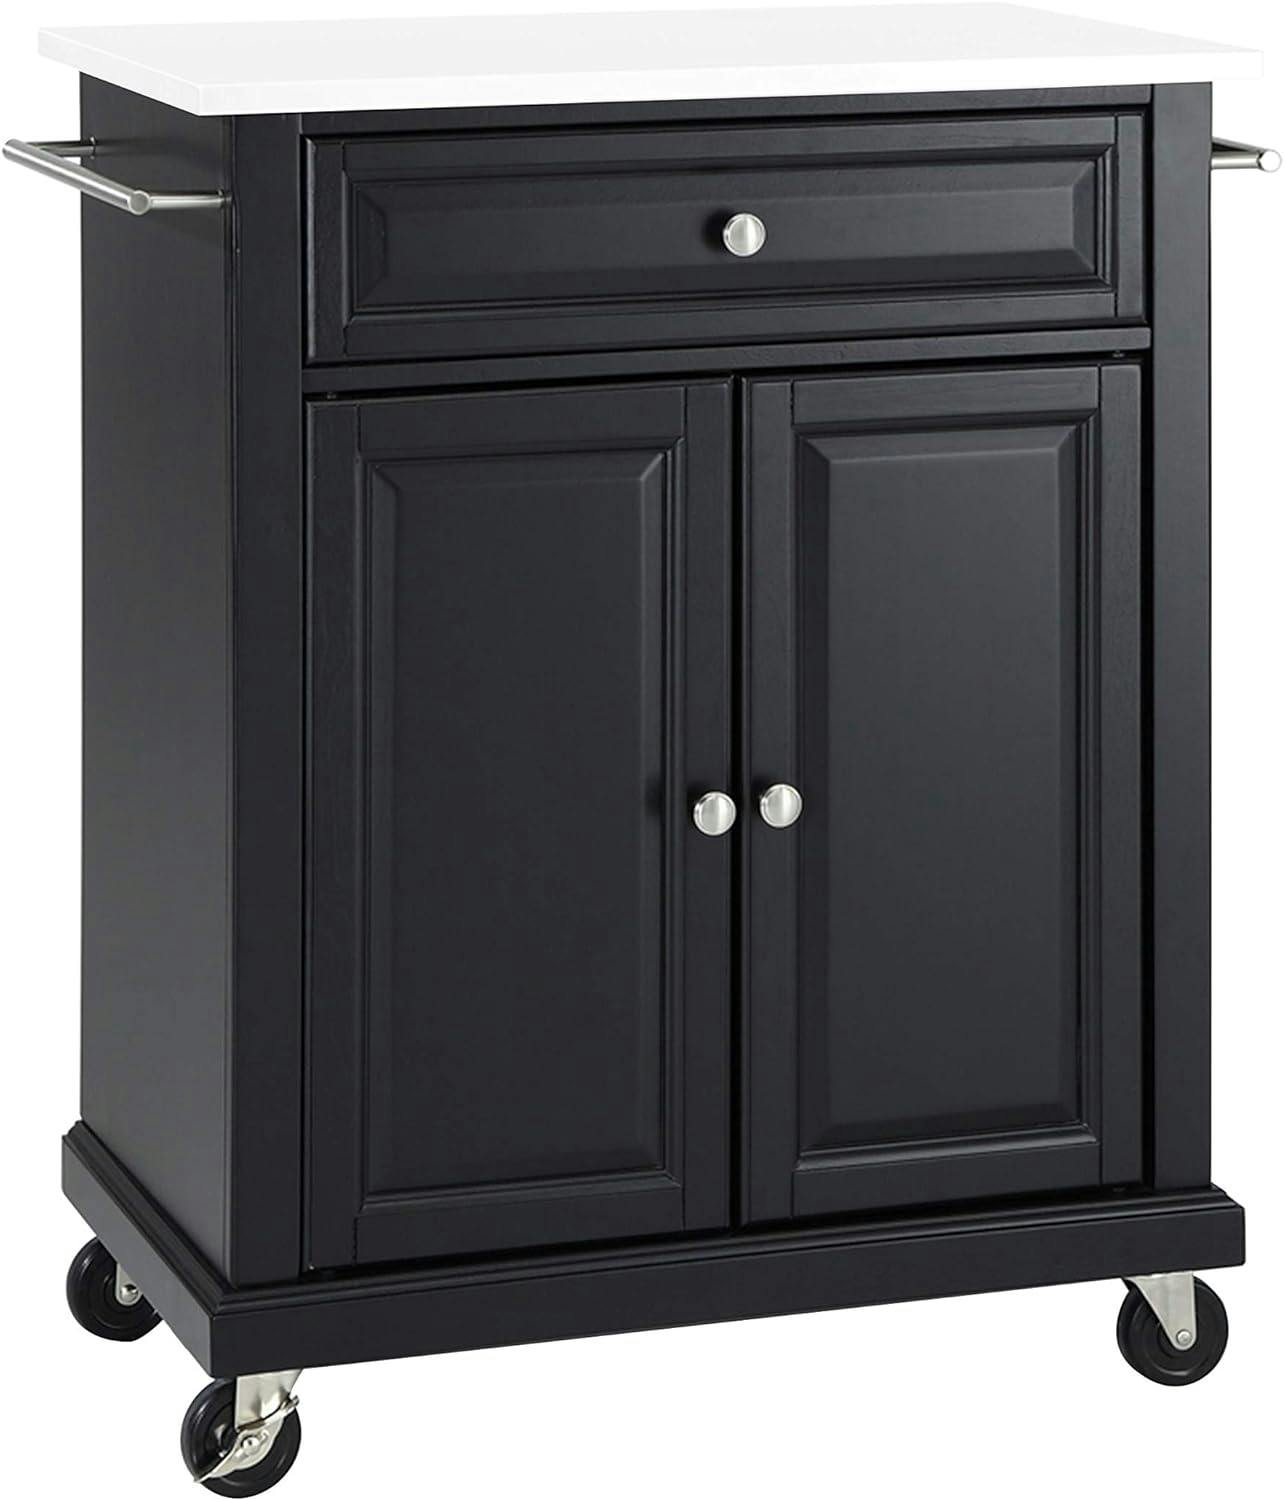 Elegant Stainless Steel Kitchen Cart with Granite Top and Storage